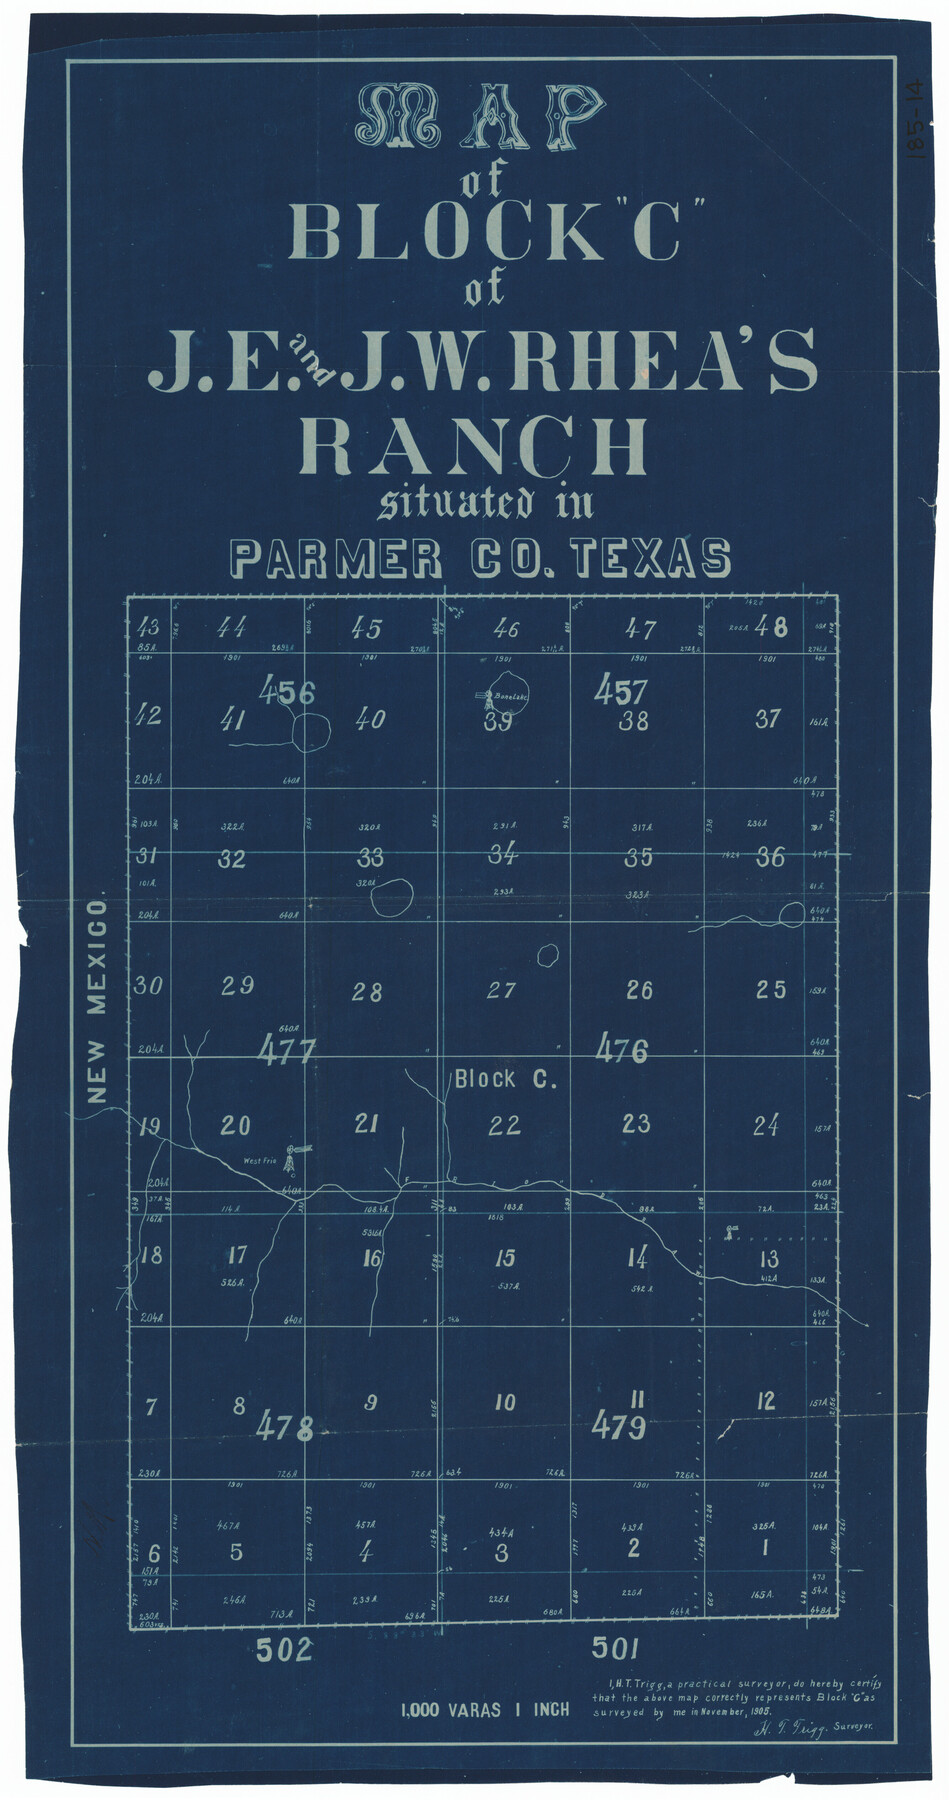 91600, Map of Block "C" of J. E. and J. W. Rhea's Ranch situated in Parmer Co., Texas, Twichell Survey Records